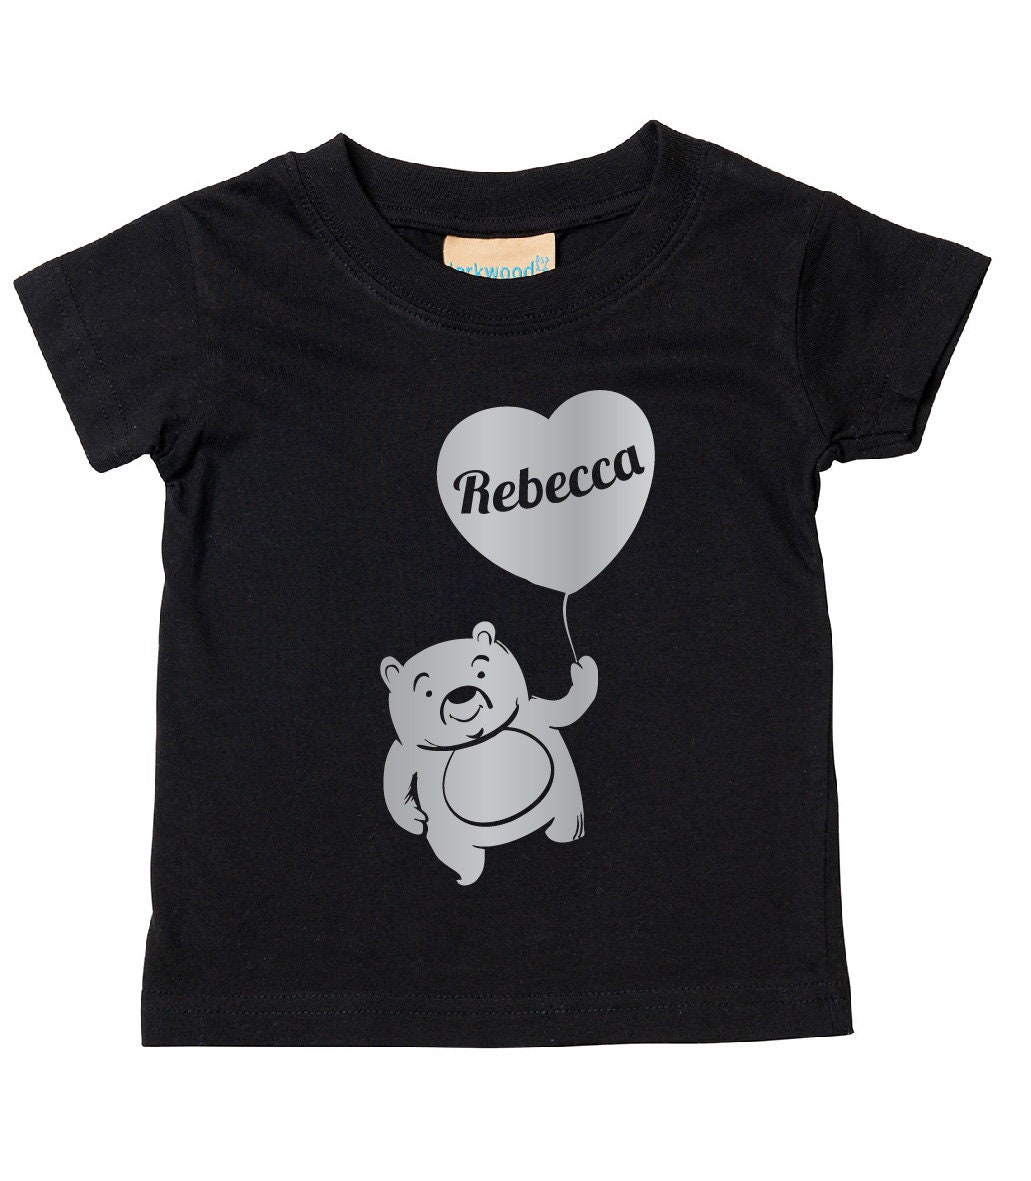 Personalised Silver Print Teddy Bear with Balloon Kids T-Shirt | Personalised Kids Tshirt with Any Name | Heart T-shirt